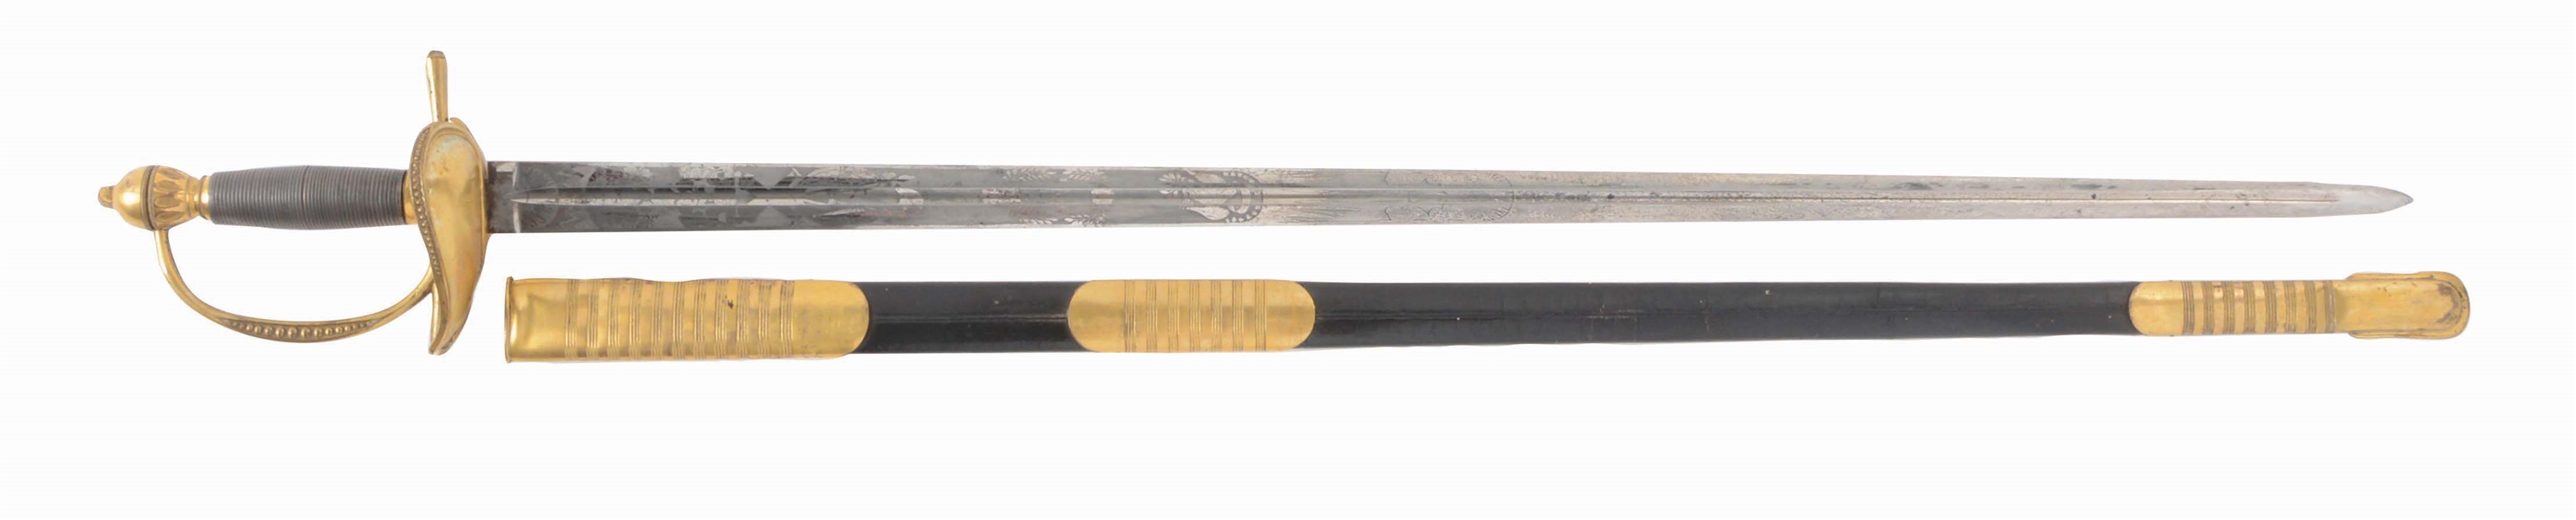 1834 OFFICERS SWORD BY AMES.